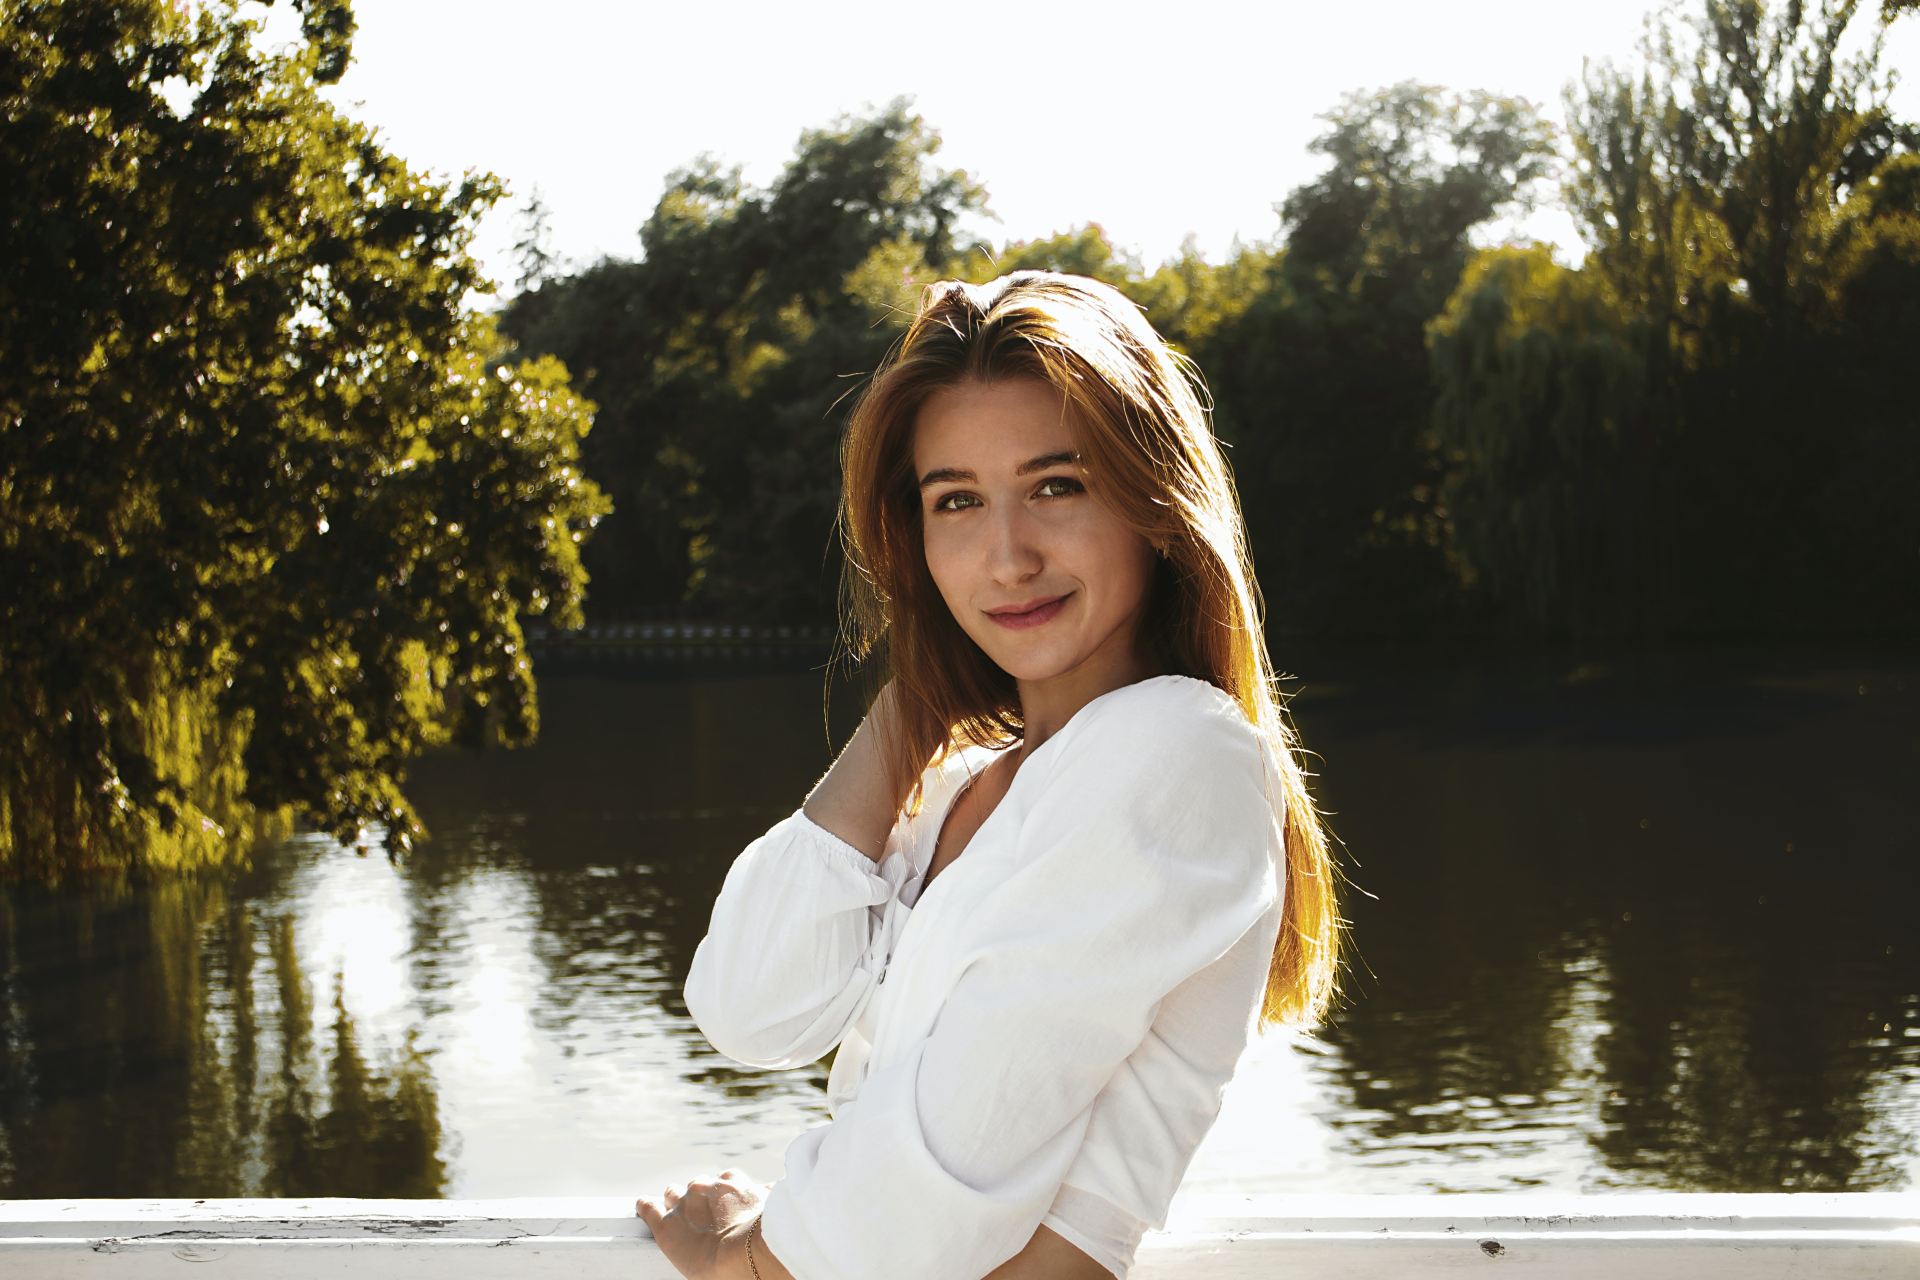 woman in white long sleeve shirt standing near body of water during daytime